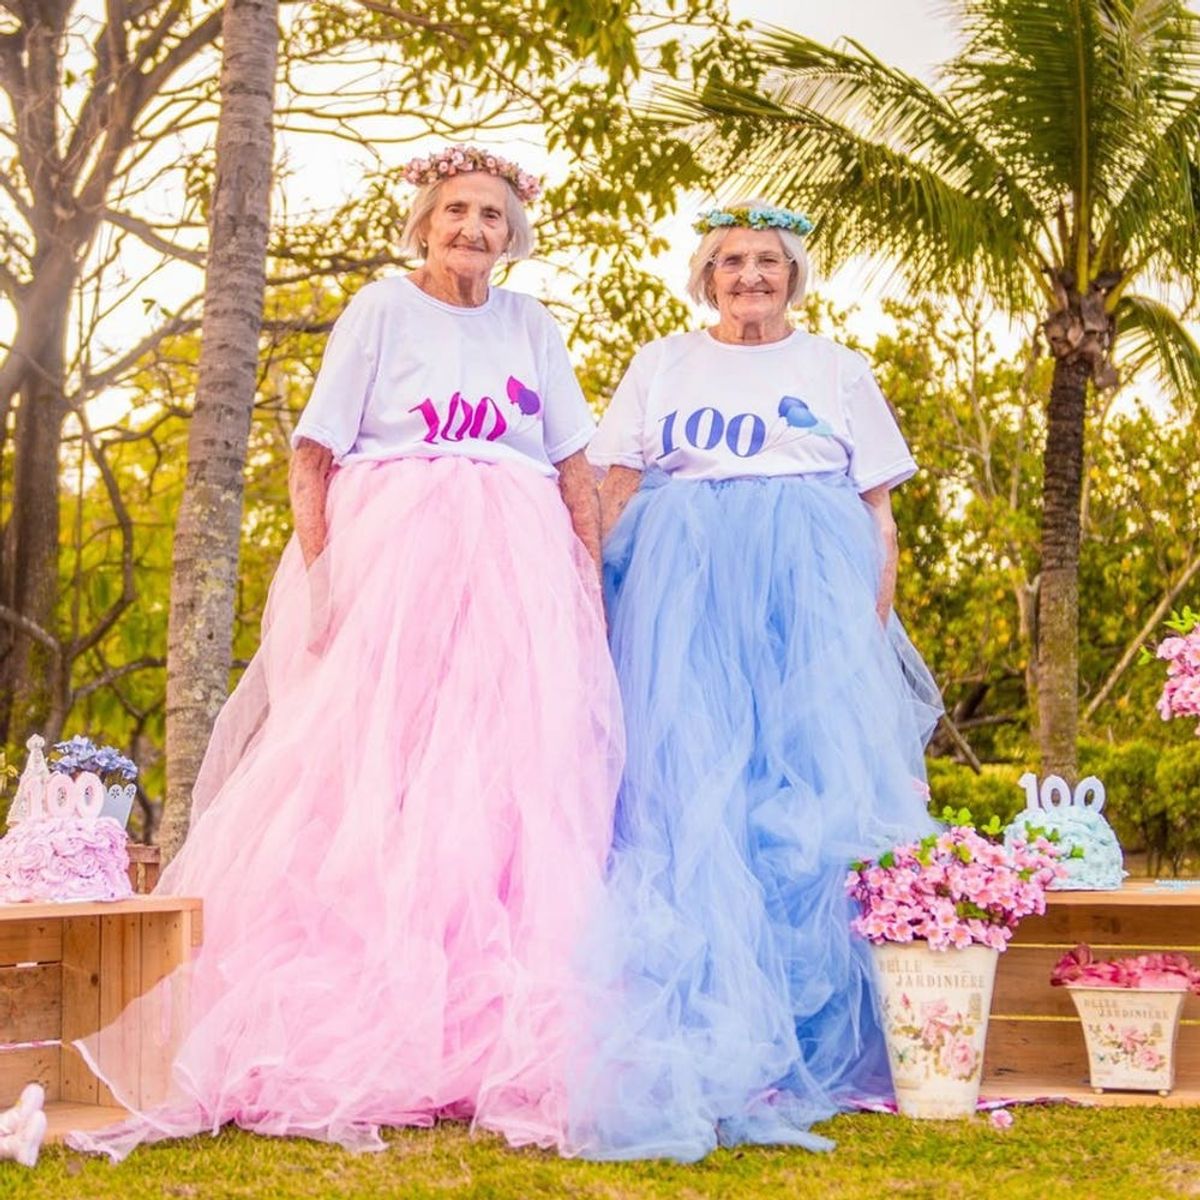 These 100-Year-Old Twin Sisters Had a Birthday Photo Shoot in Matching Tutus and It’s Giving Us Major Life Goals